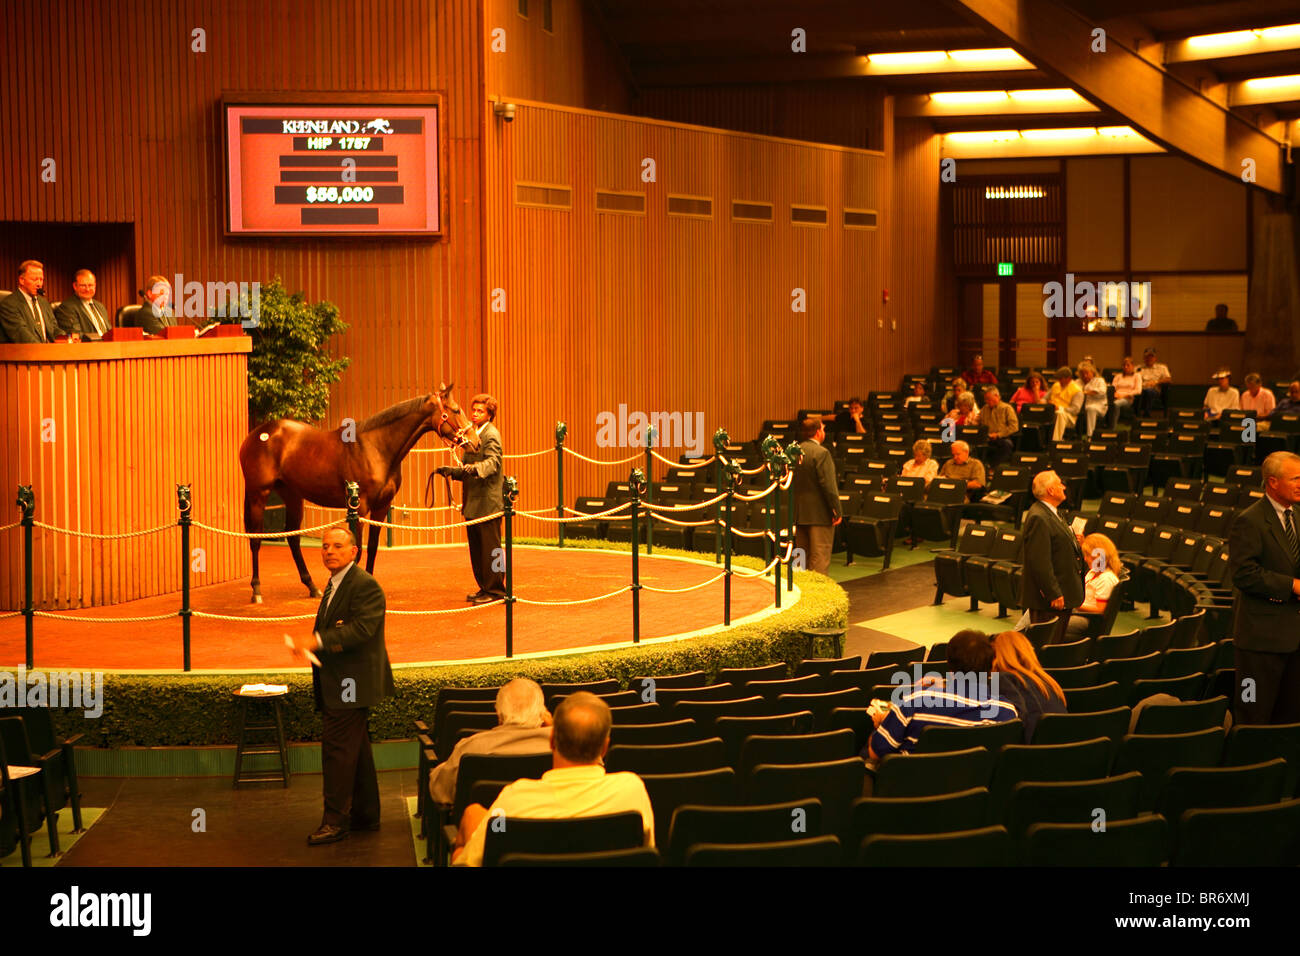 The horse auction at Keeneland racetrack in Lexington KY. Stock Photo